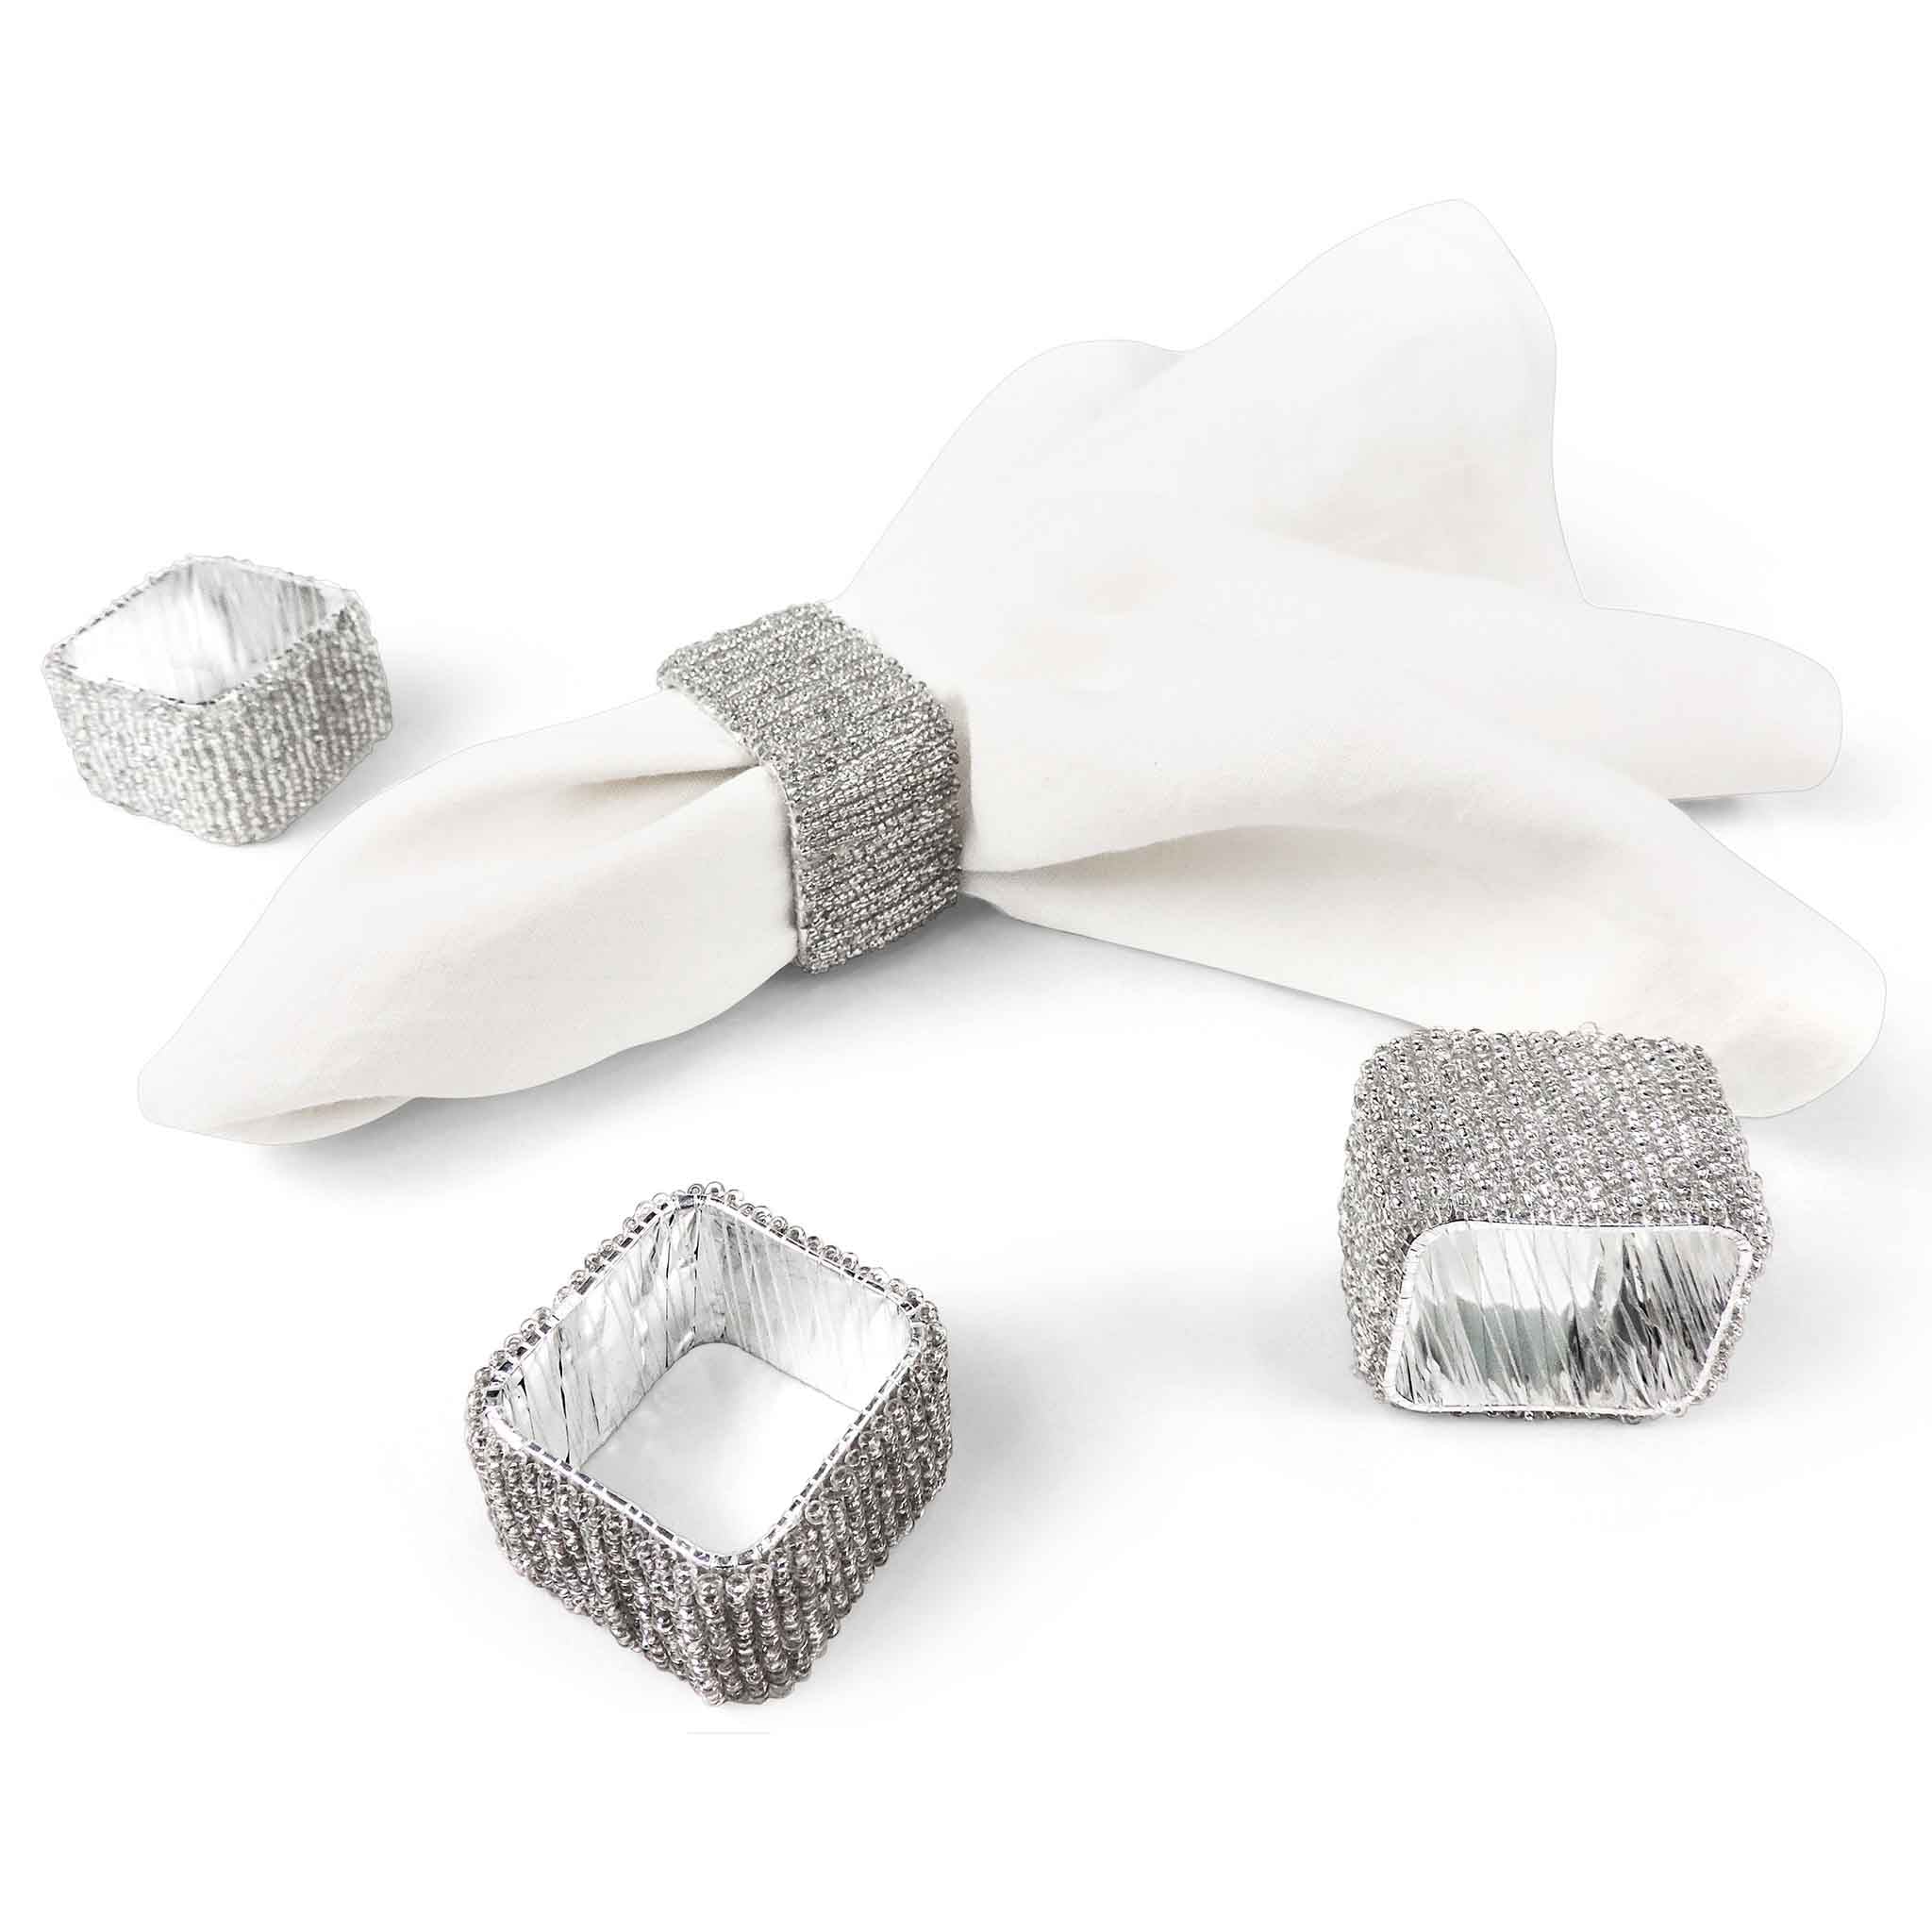 Classic Square Napkin Ring in Silver, Set of 4